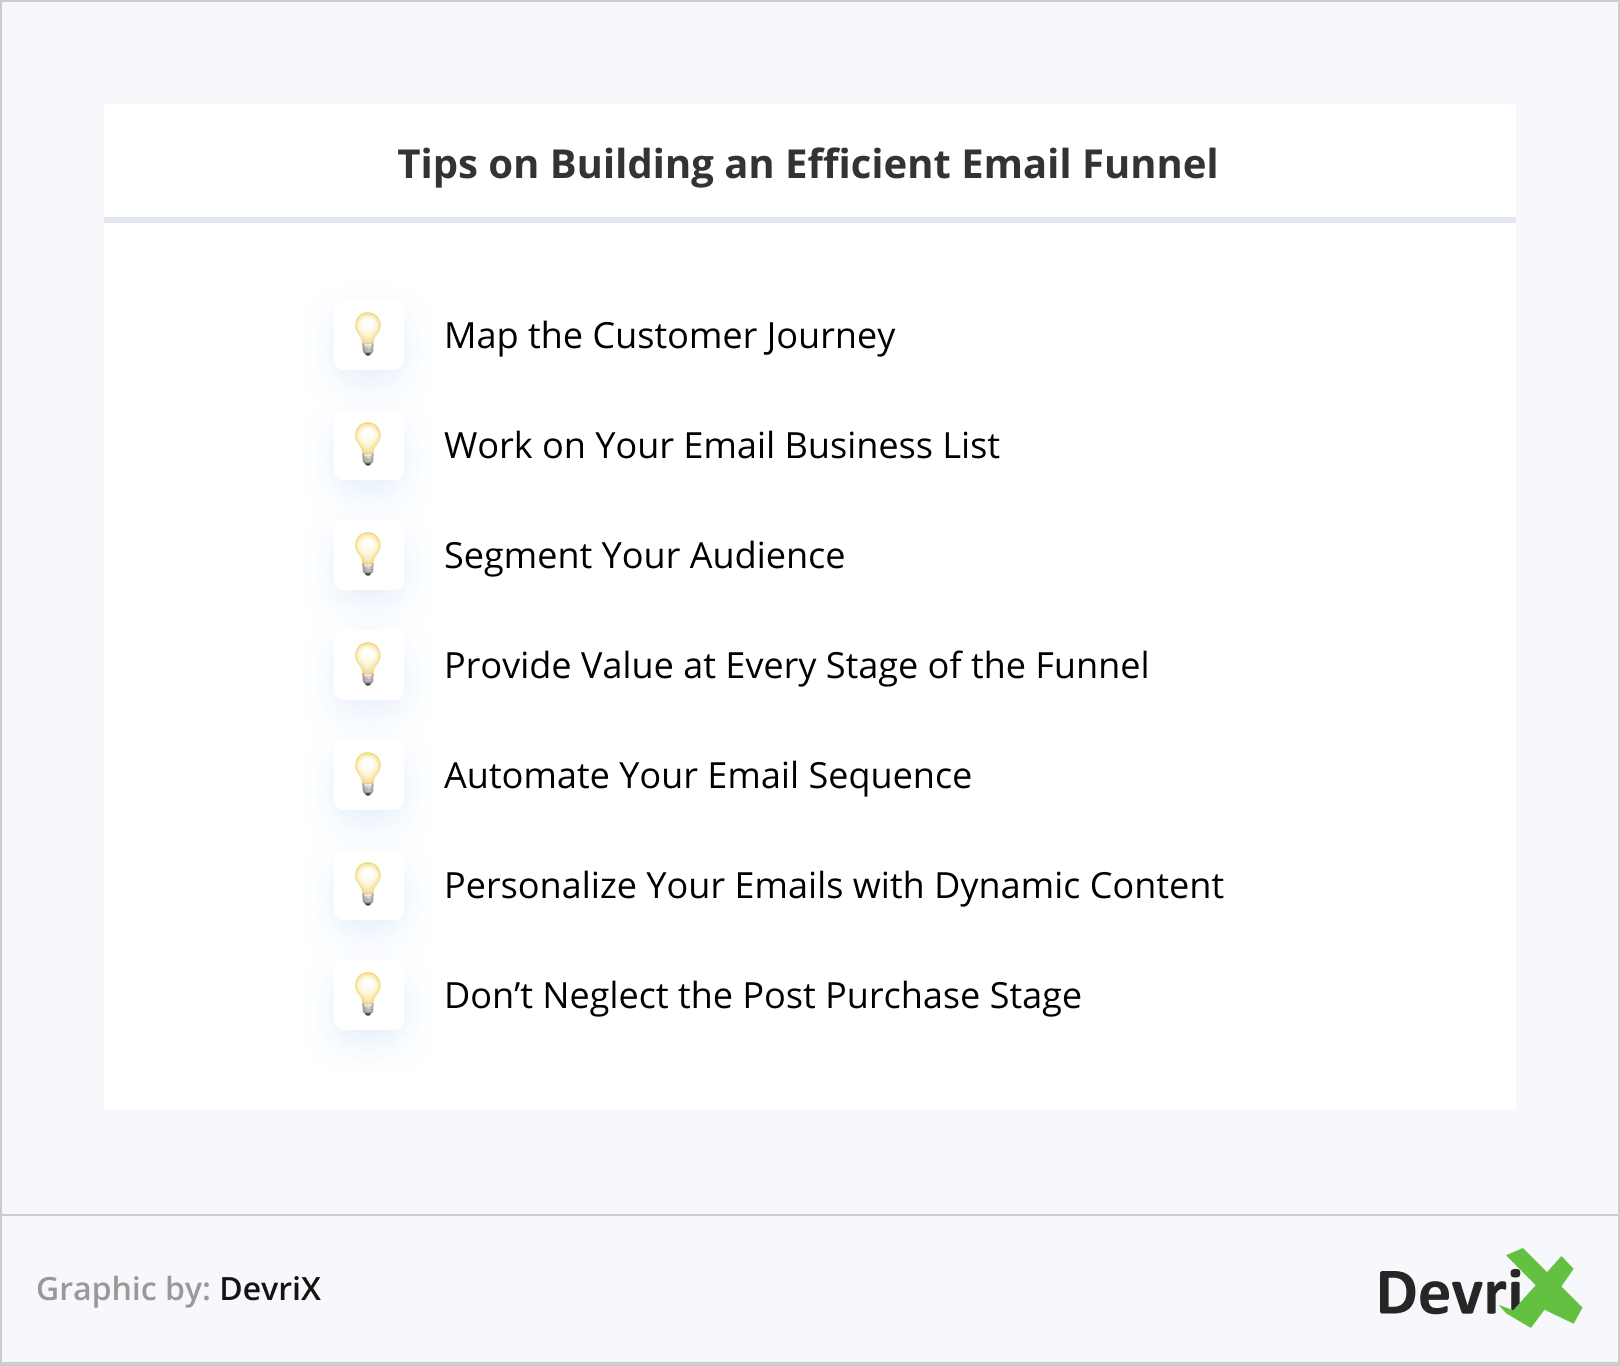 Tips on Building an Efficient Email Funnel